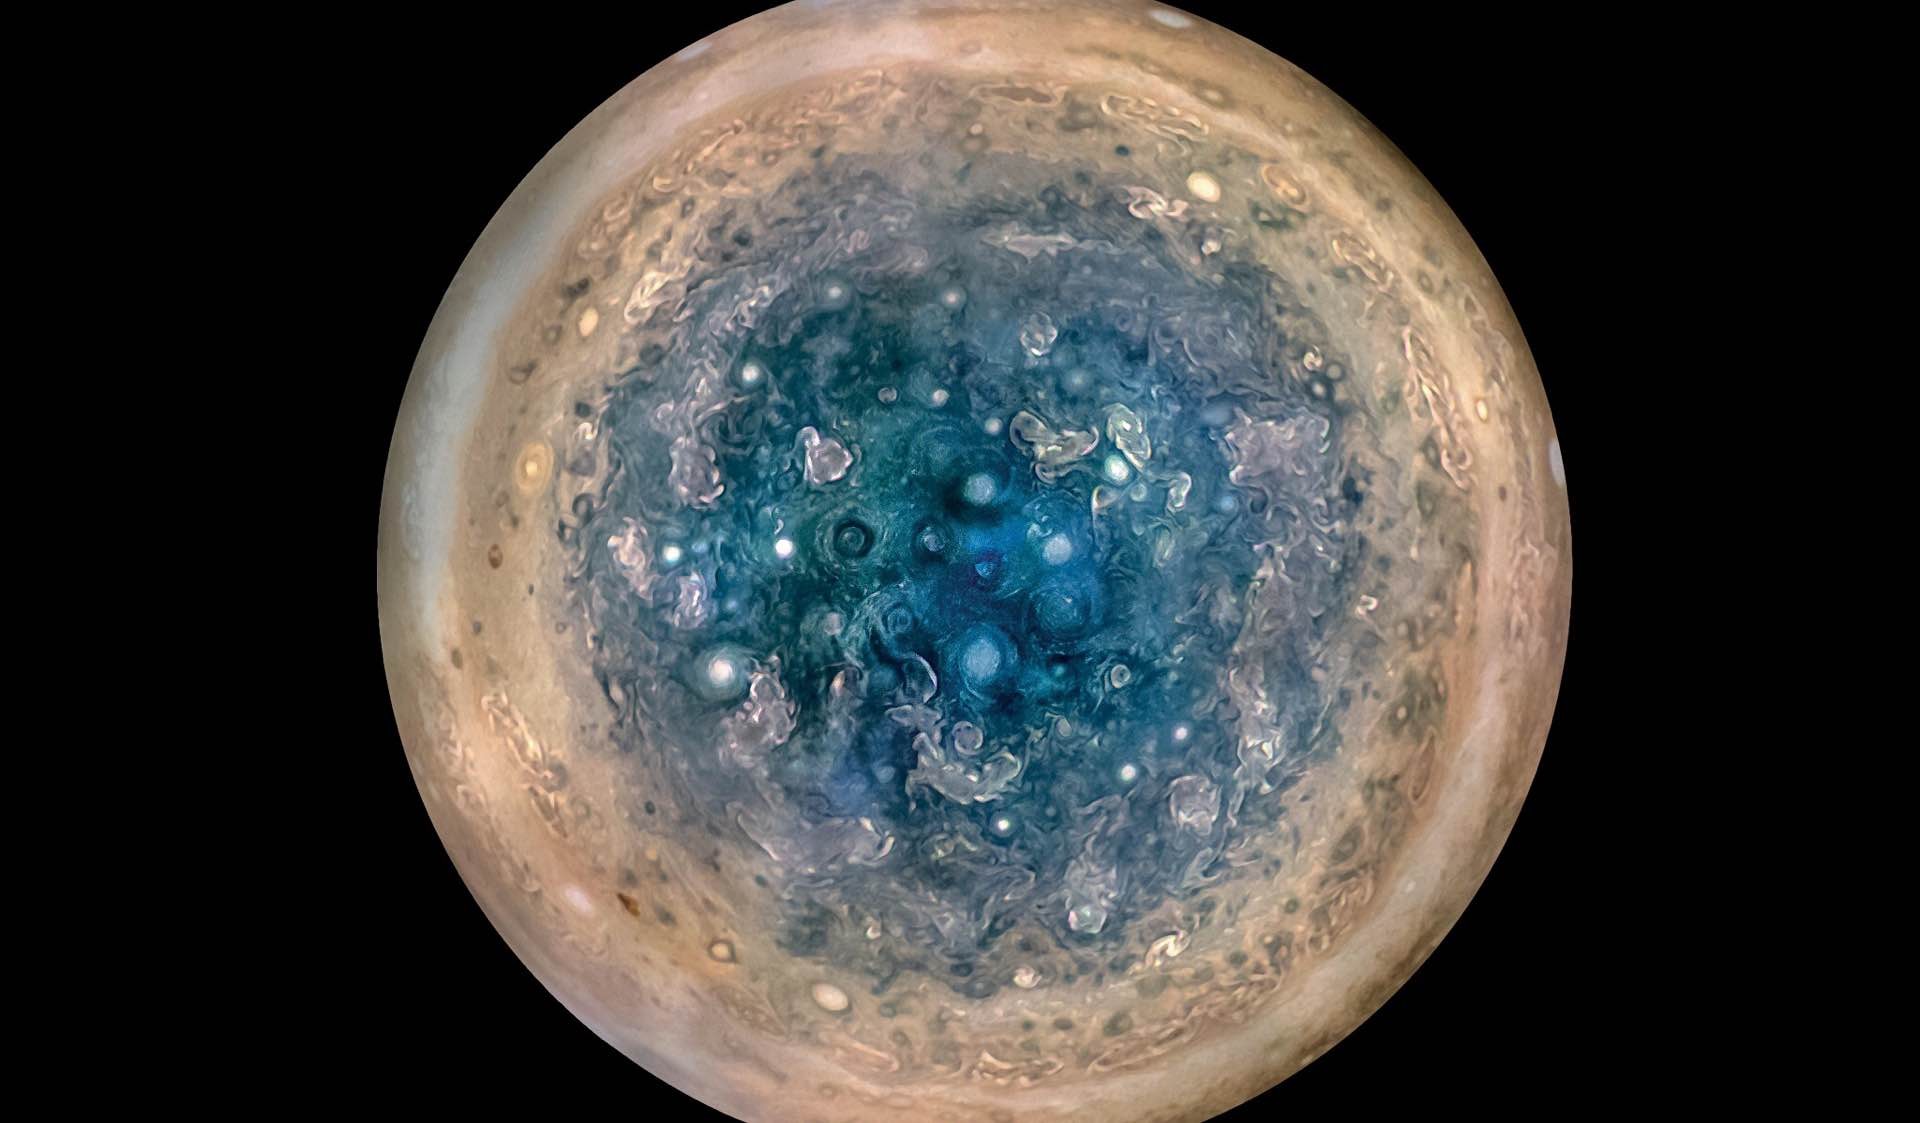 Jupiter's south pole, seen from a distance of just over 50,000 km.Photo credit: NASA/JPL-Caltech/SwRI/MSSS/Betsy Asher Hall/Gervasio Robles (but rotated and landscape'd by yours truly)